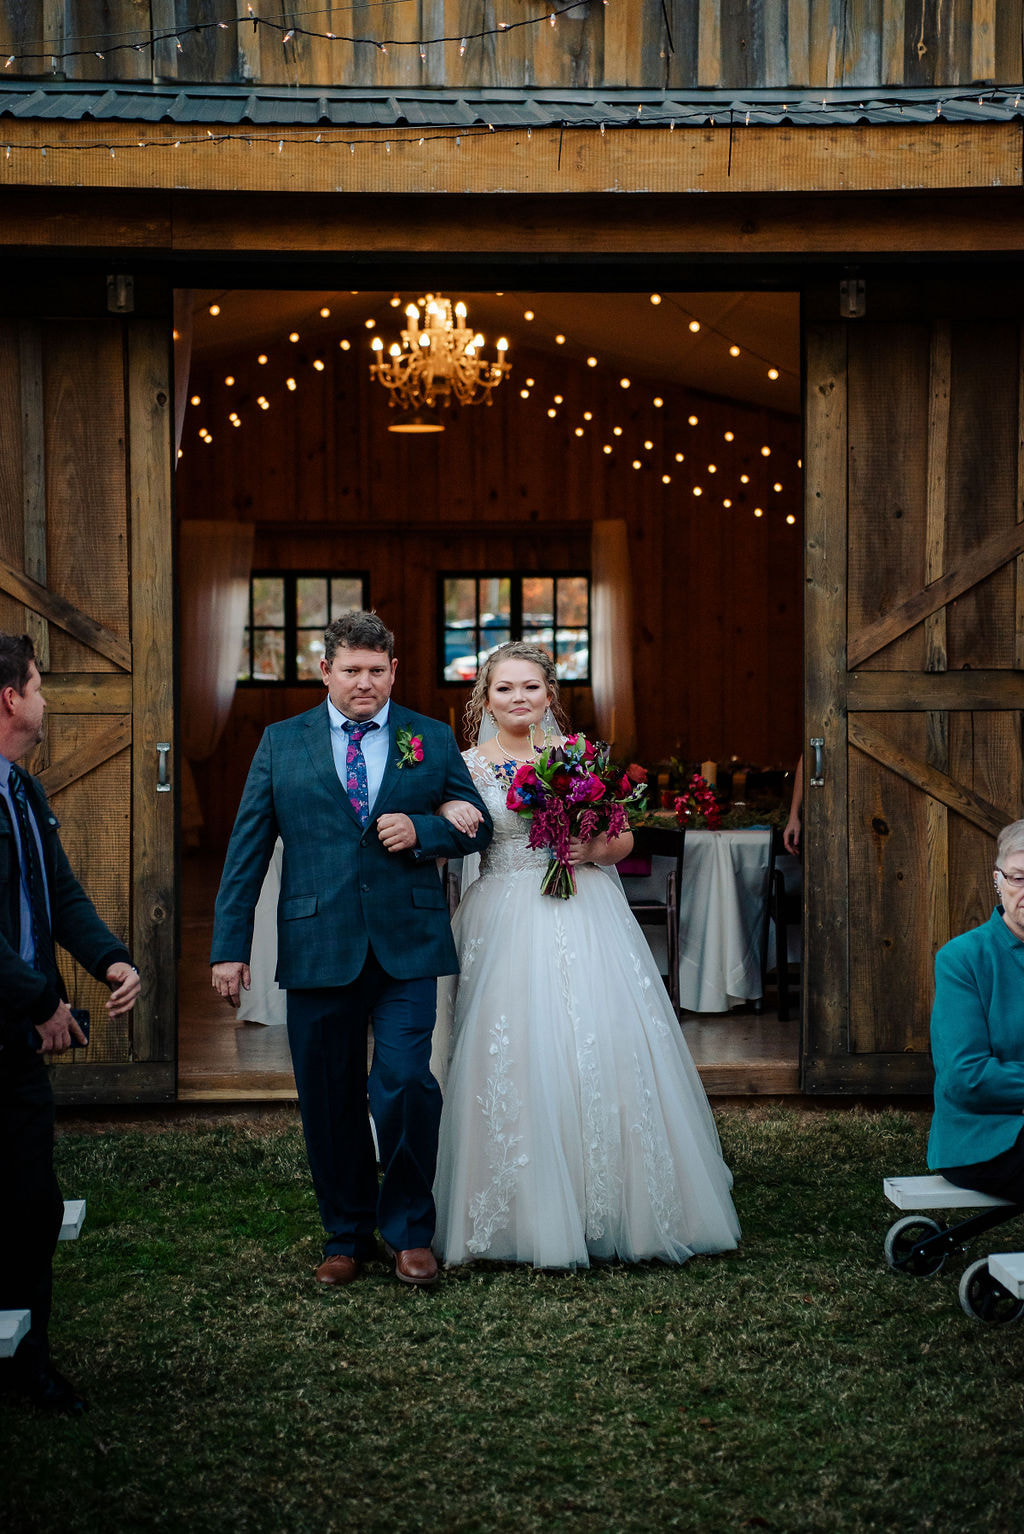 Bride and father walking down the aisle at barn venue